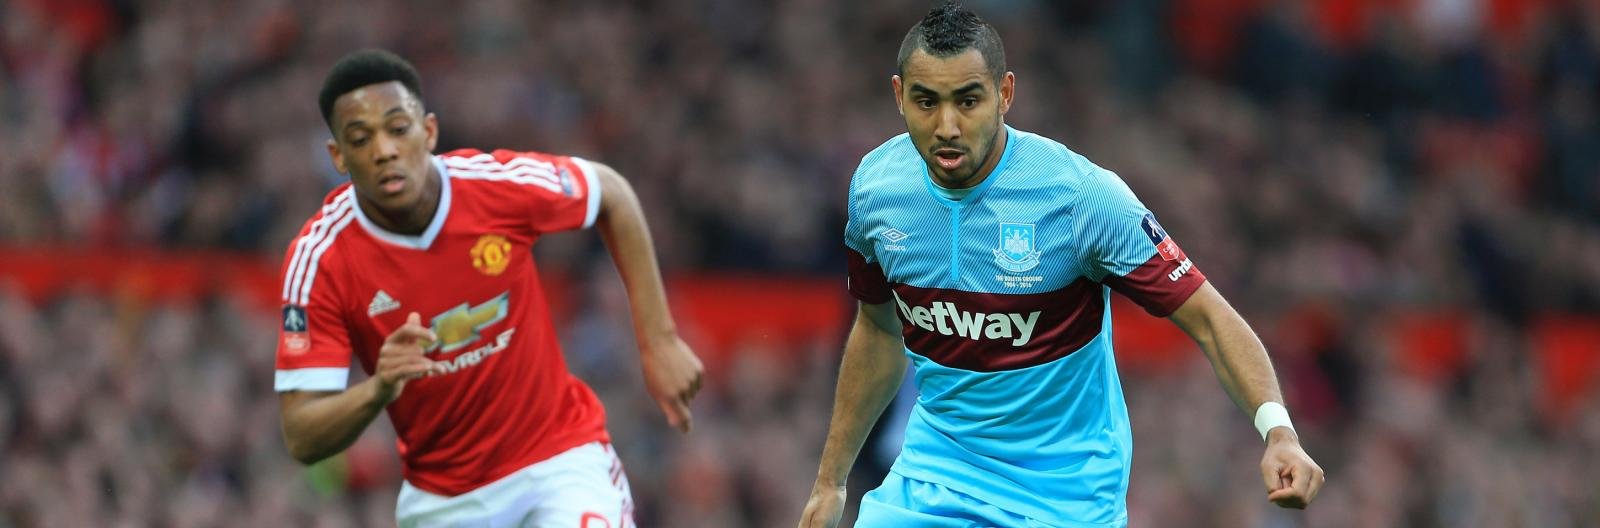 West Ham United vs Manchester United: Preview & Prediction